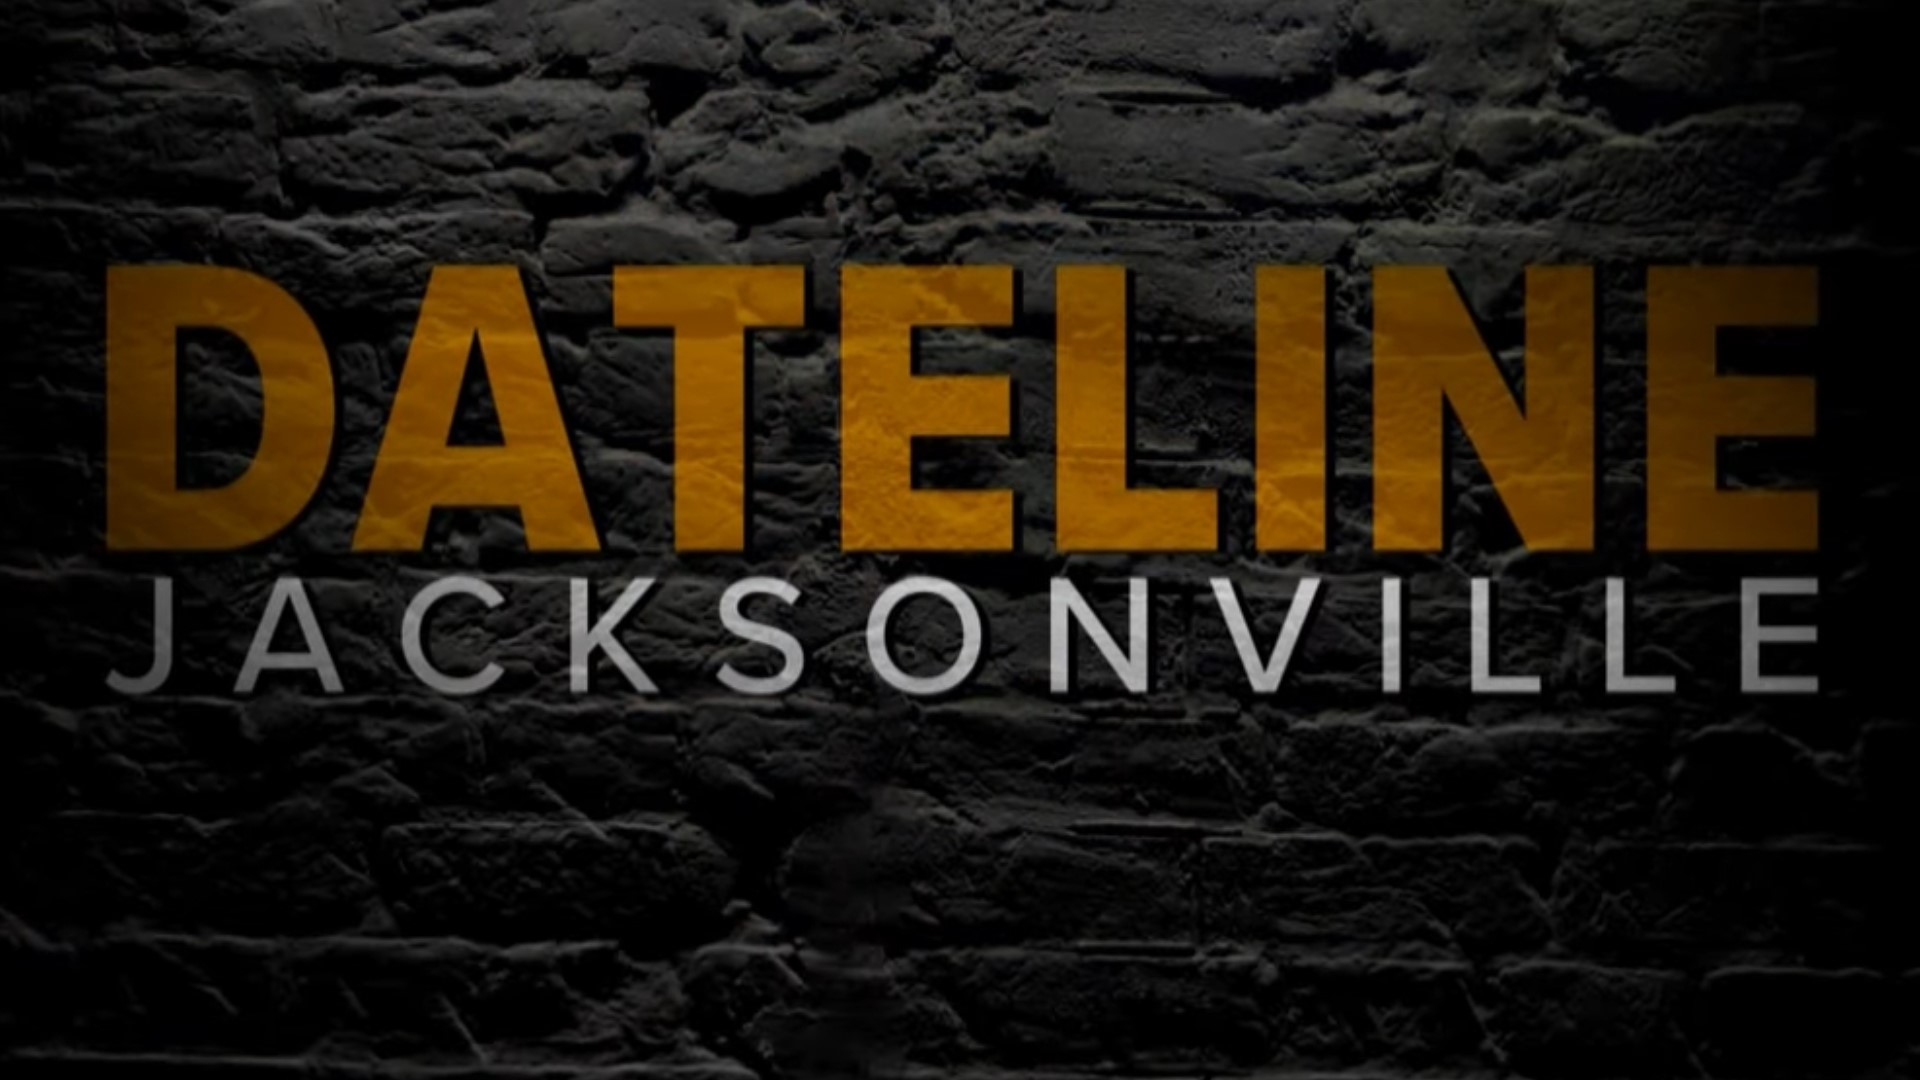 Dateline Jacksonville is an hour full of interesting and informative stories and investigations from around the First Coast.